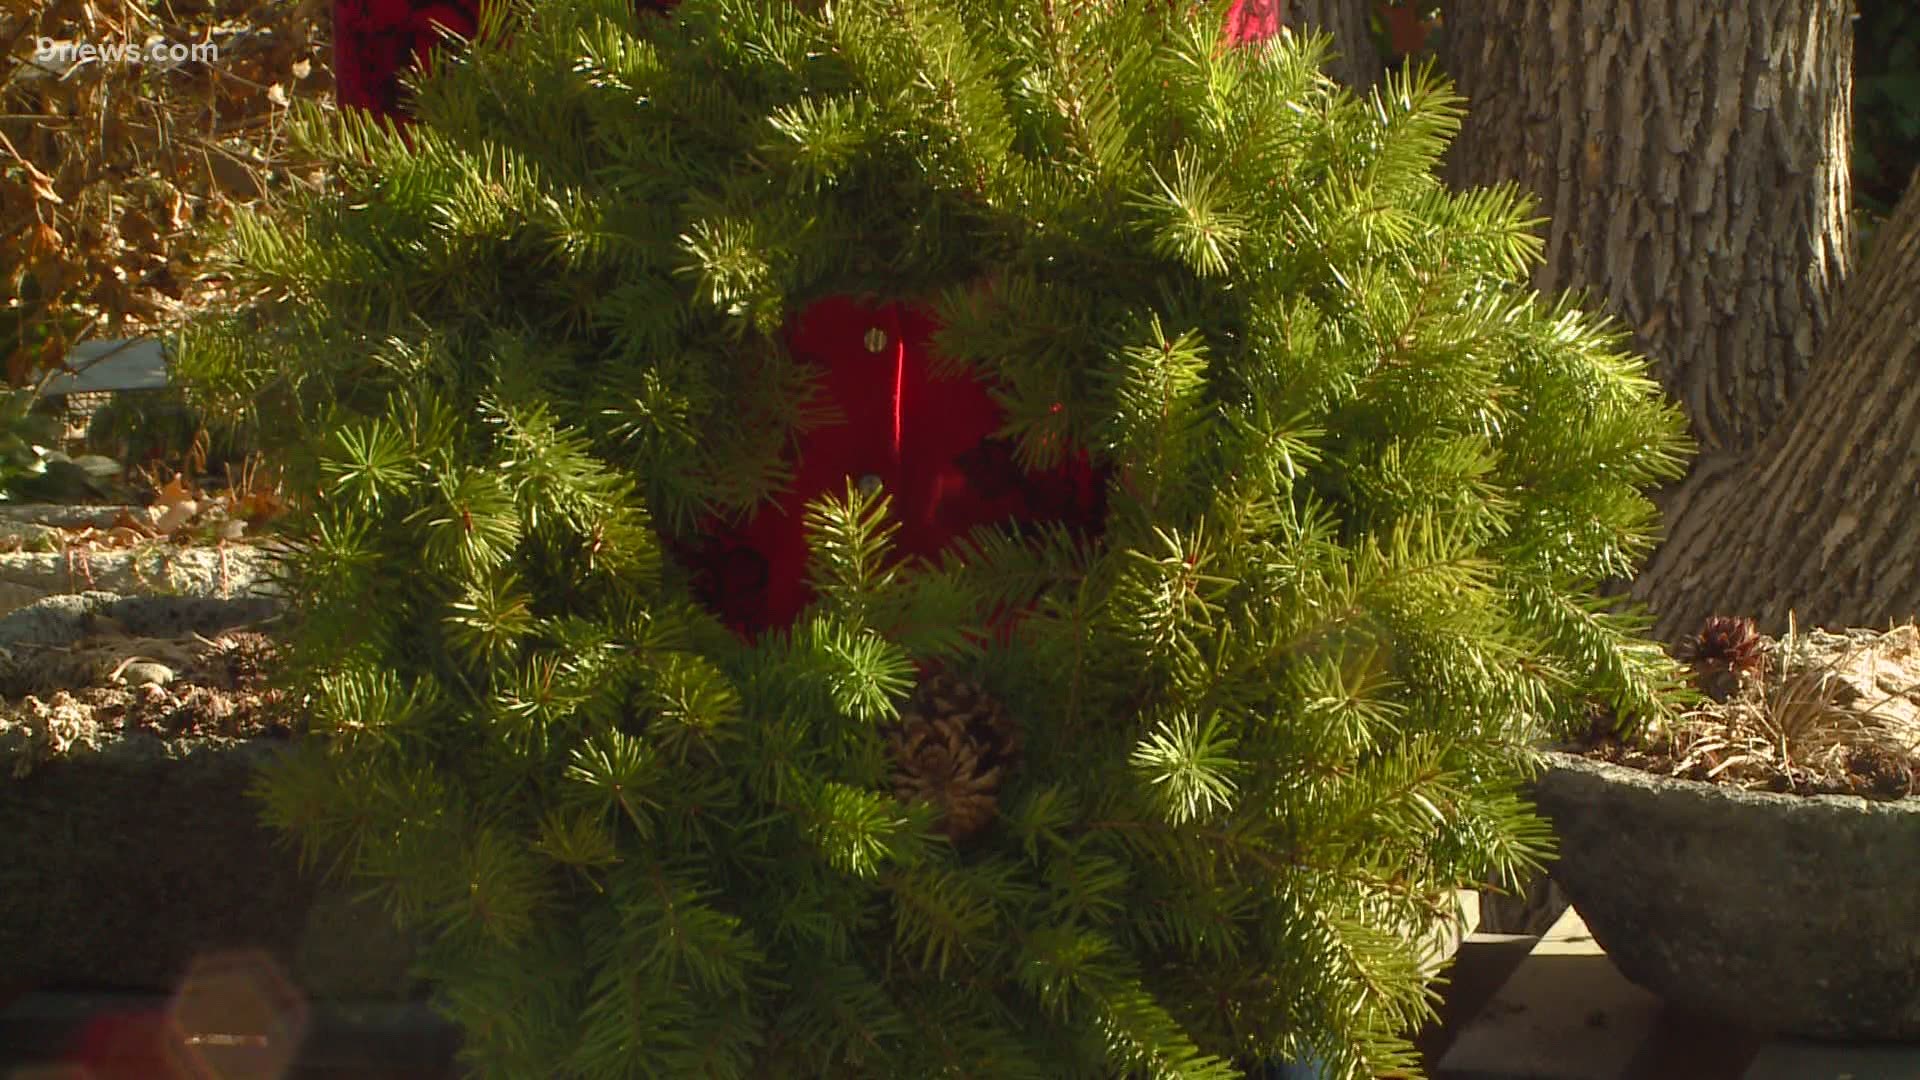 How to keep your evergreen trees and wreaths fresh and beautiful.